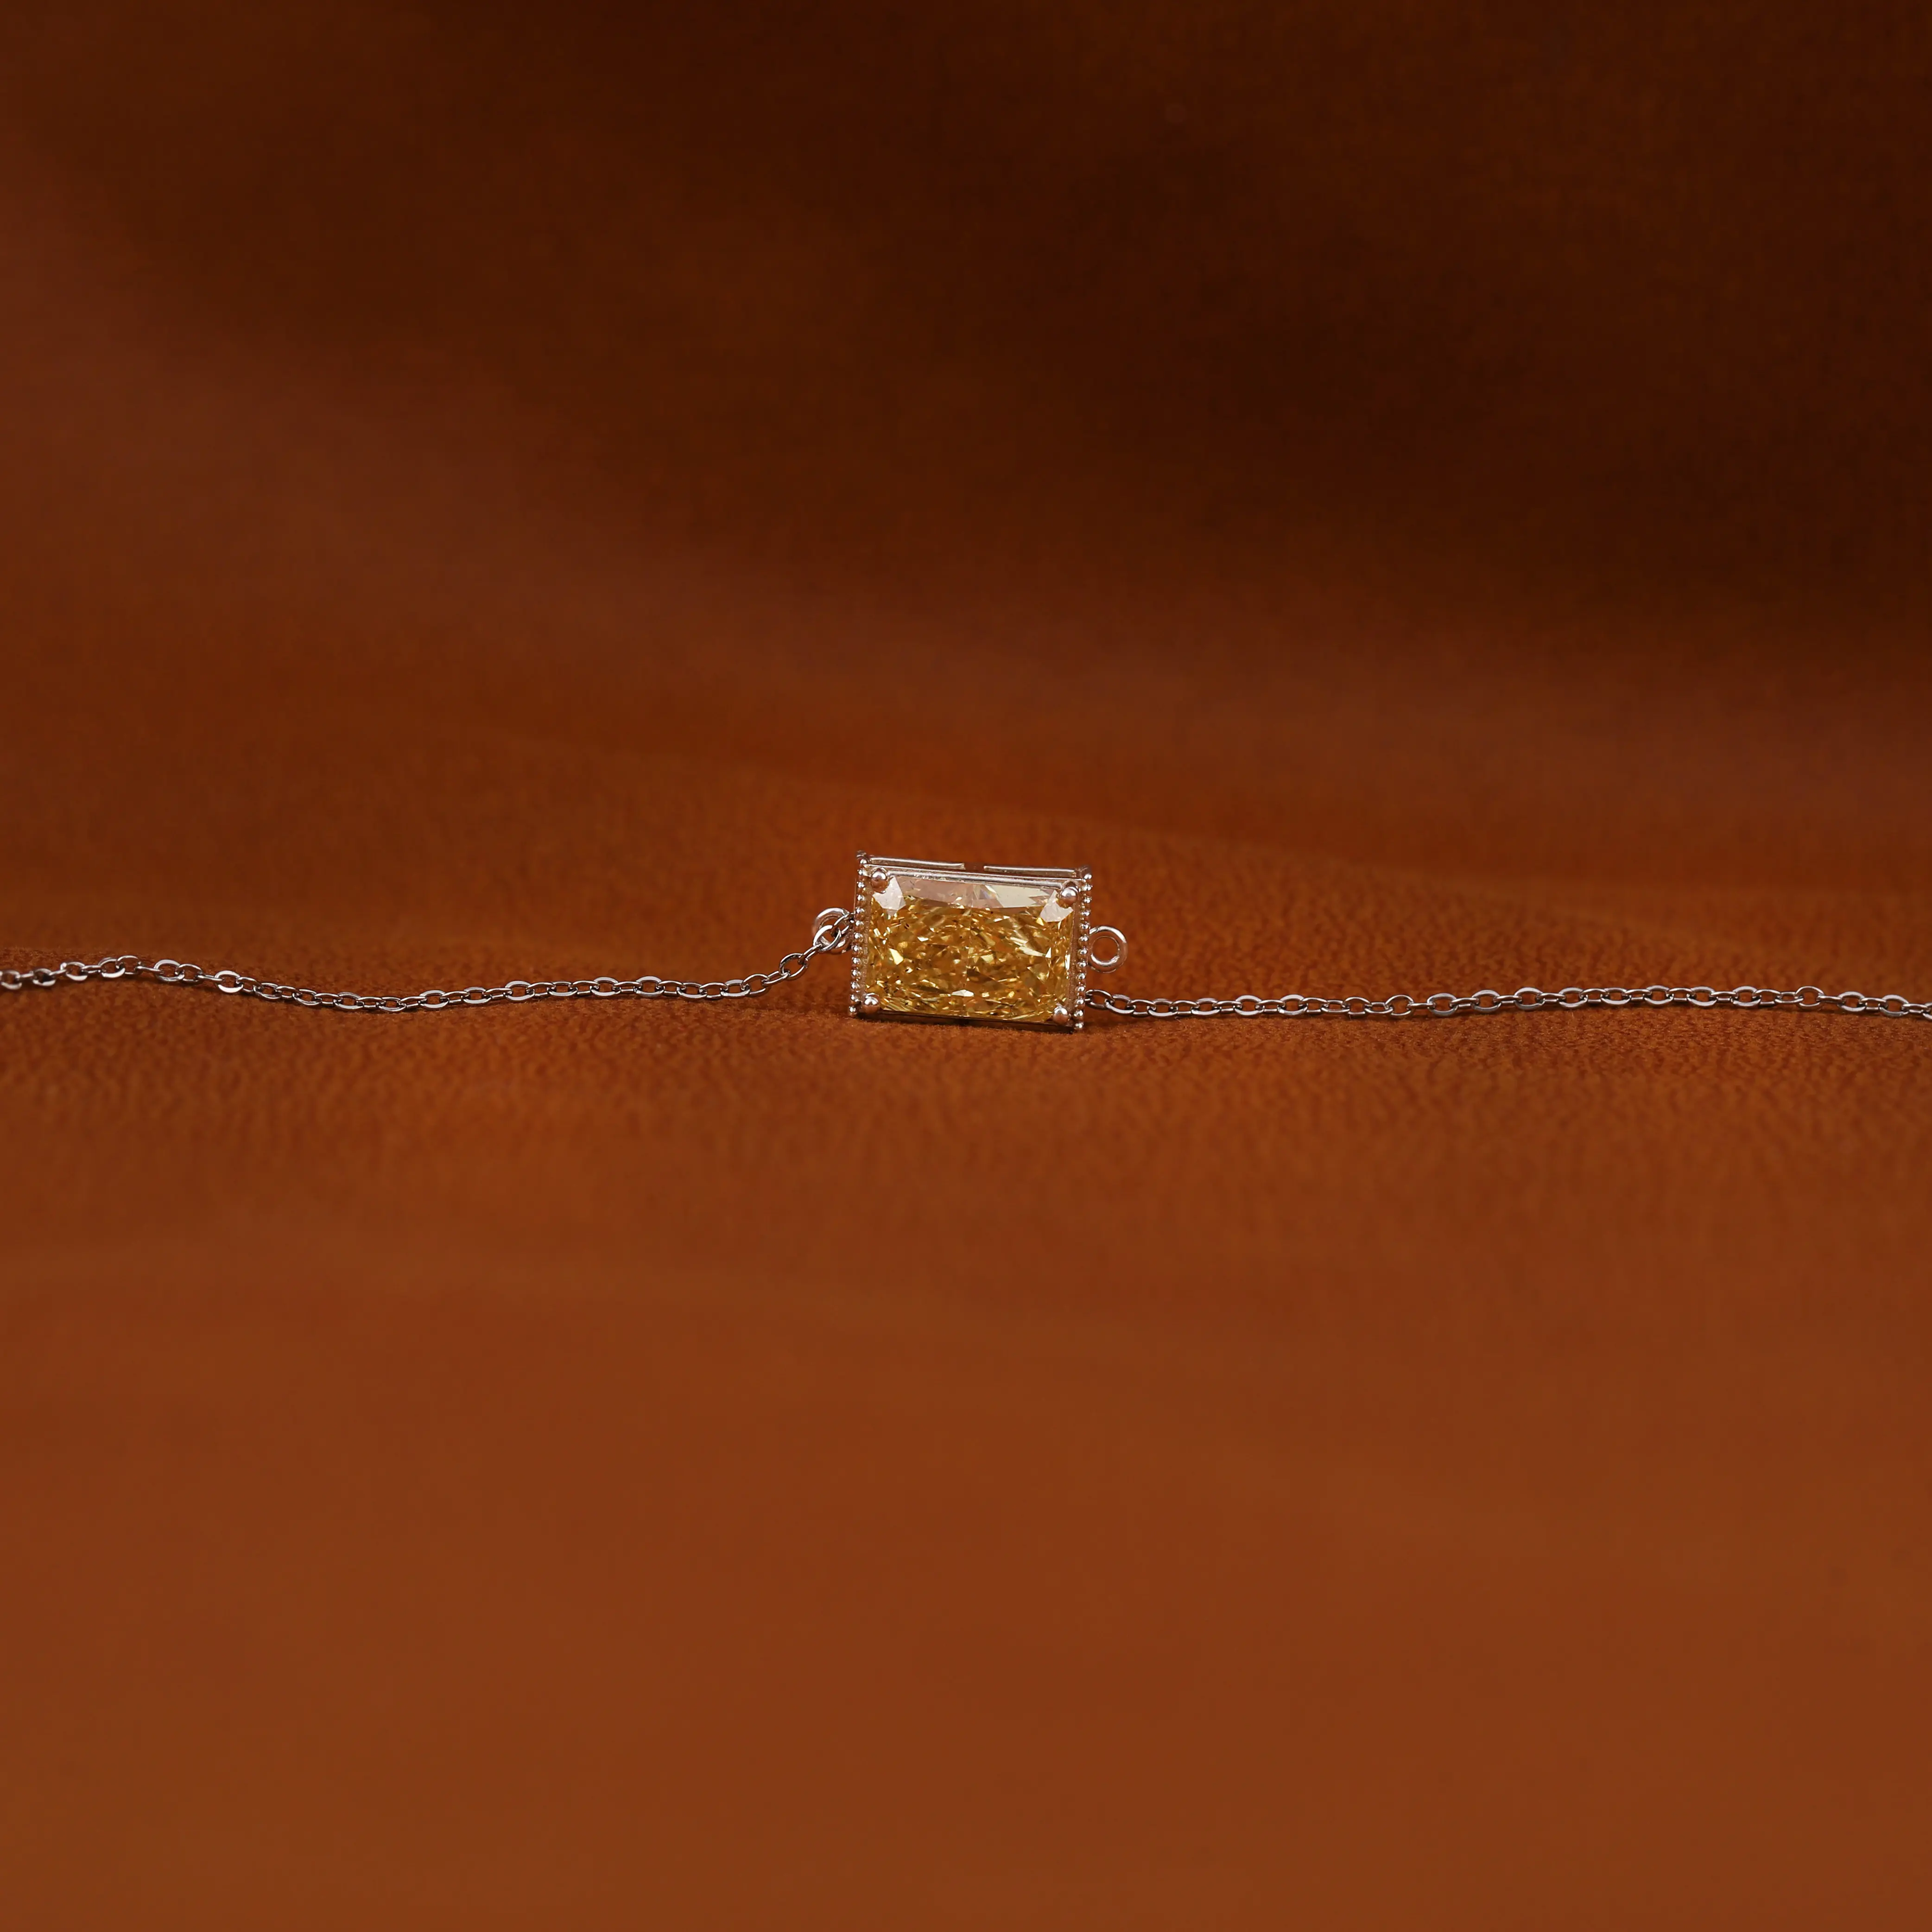 LAB GROWN DIAMOND RADIANT SHAPED CUSTOMISED Pendant Chain MADE IN 14KT SOLID GOLD USED FOR ALL OCCASIONS FOR WOMEN